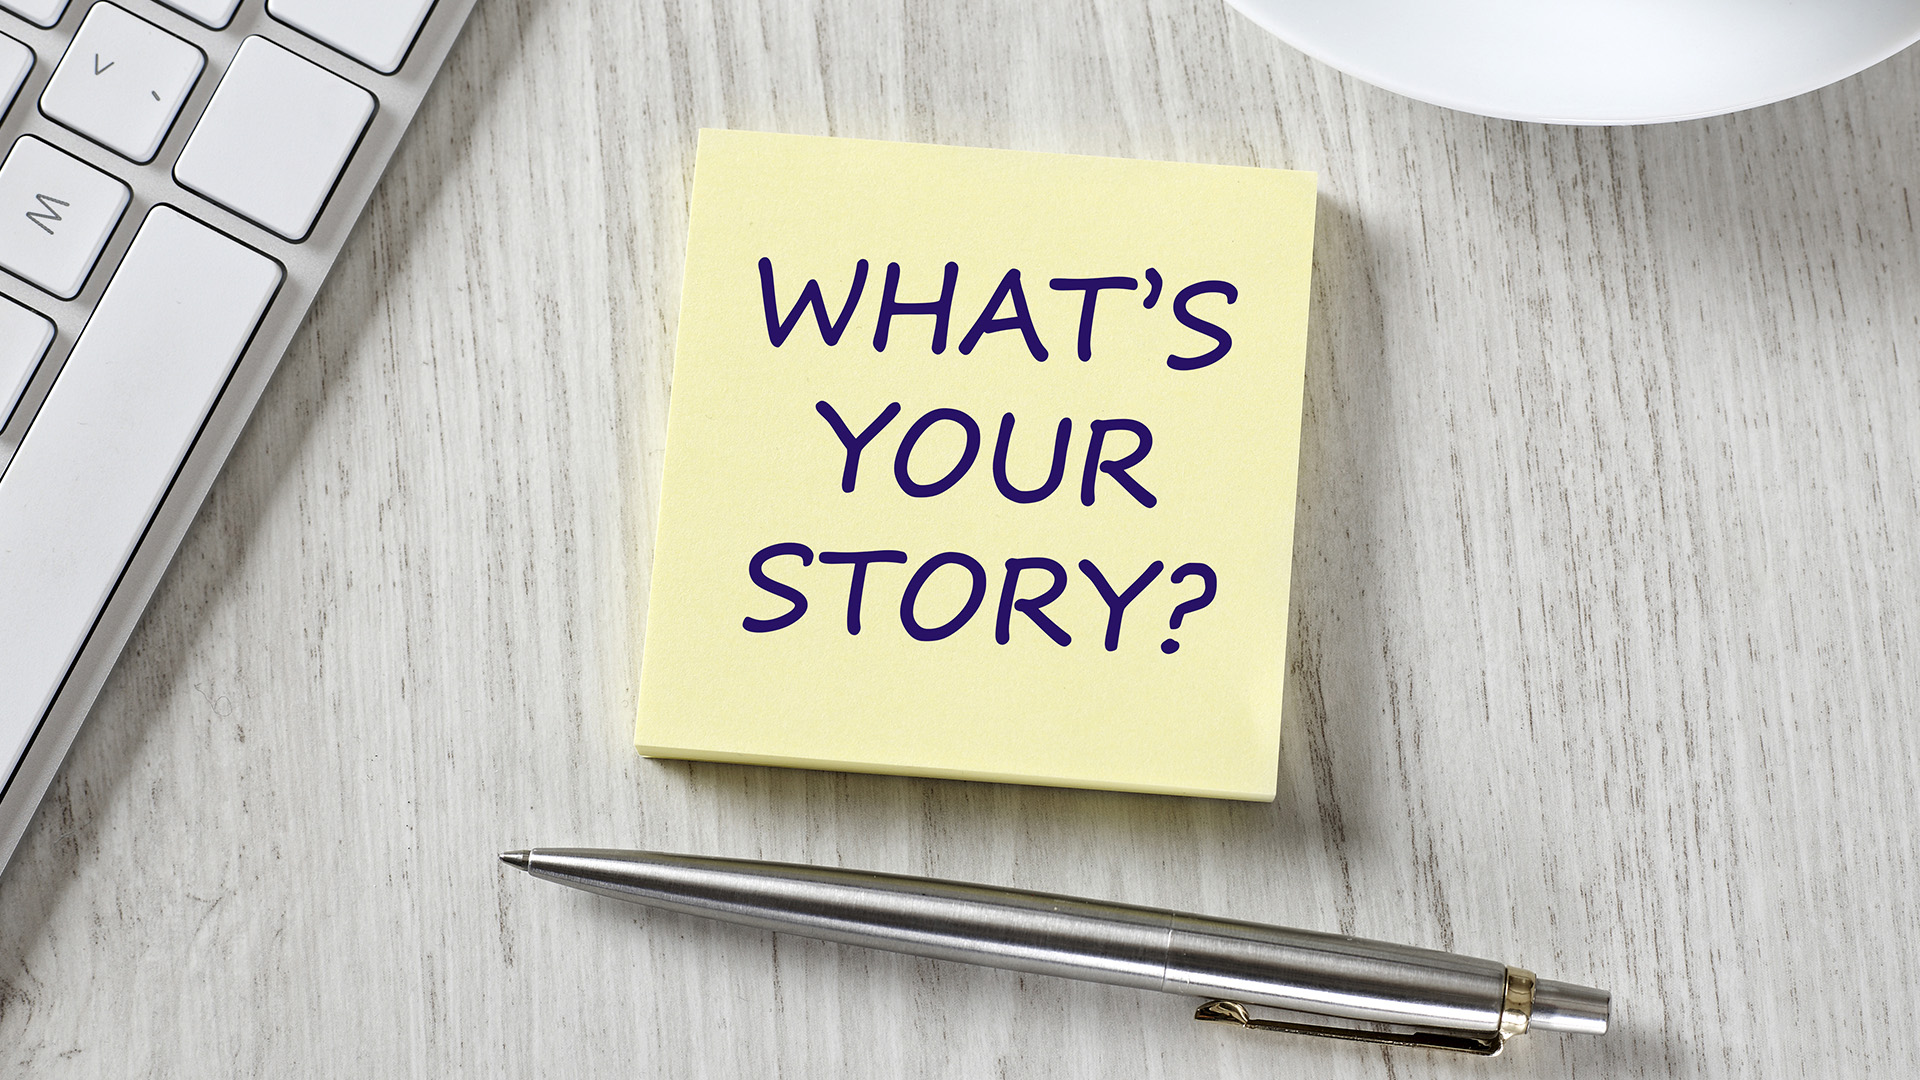 Finding the Stories in Your Organization